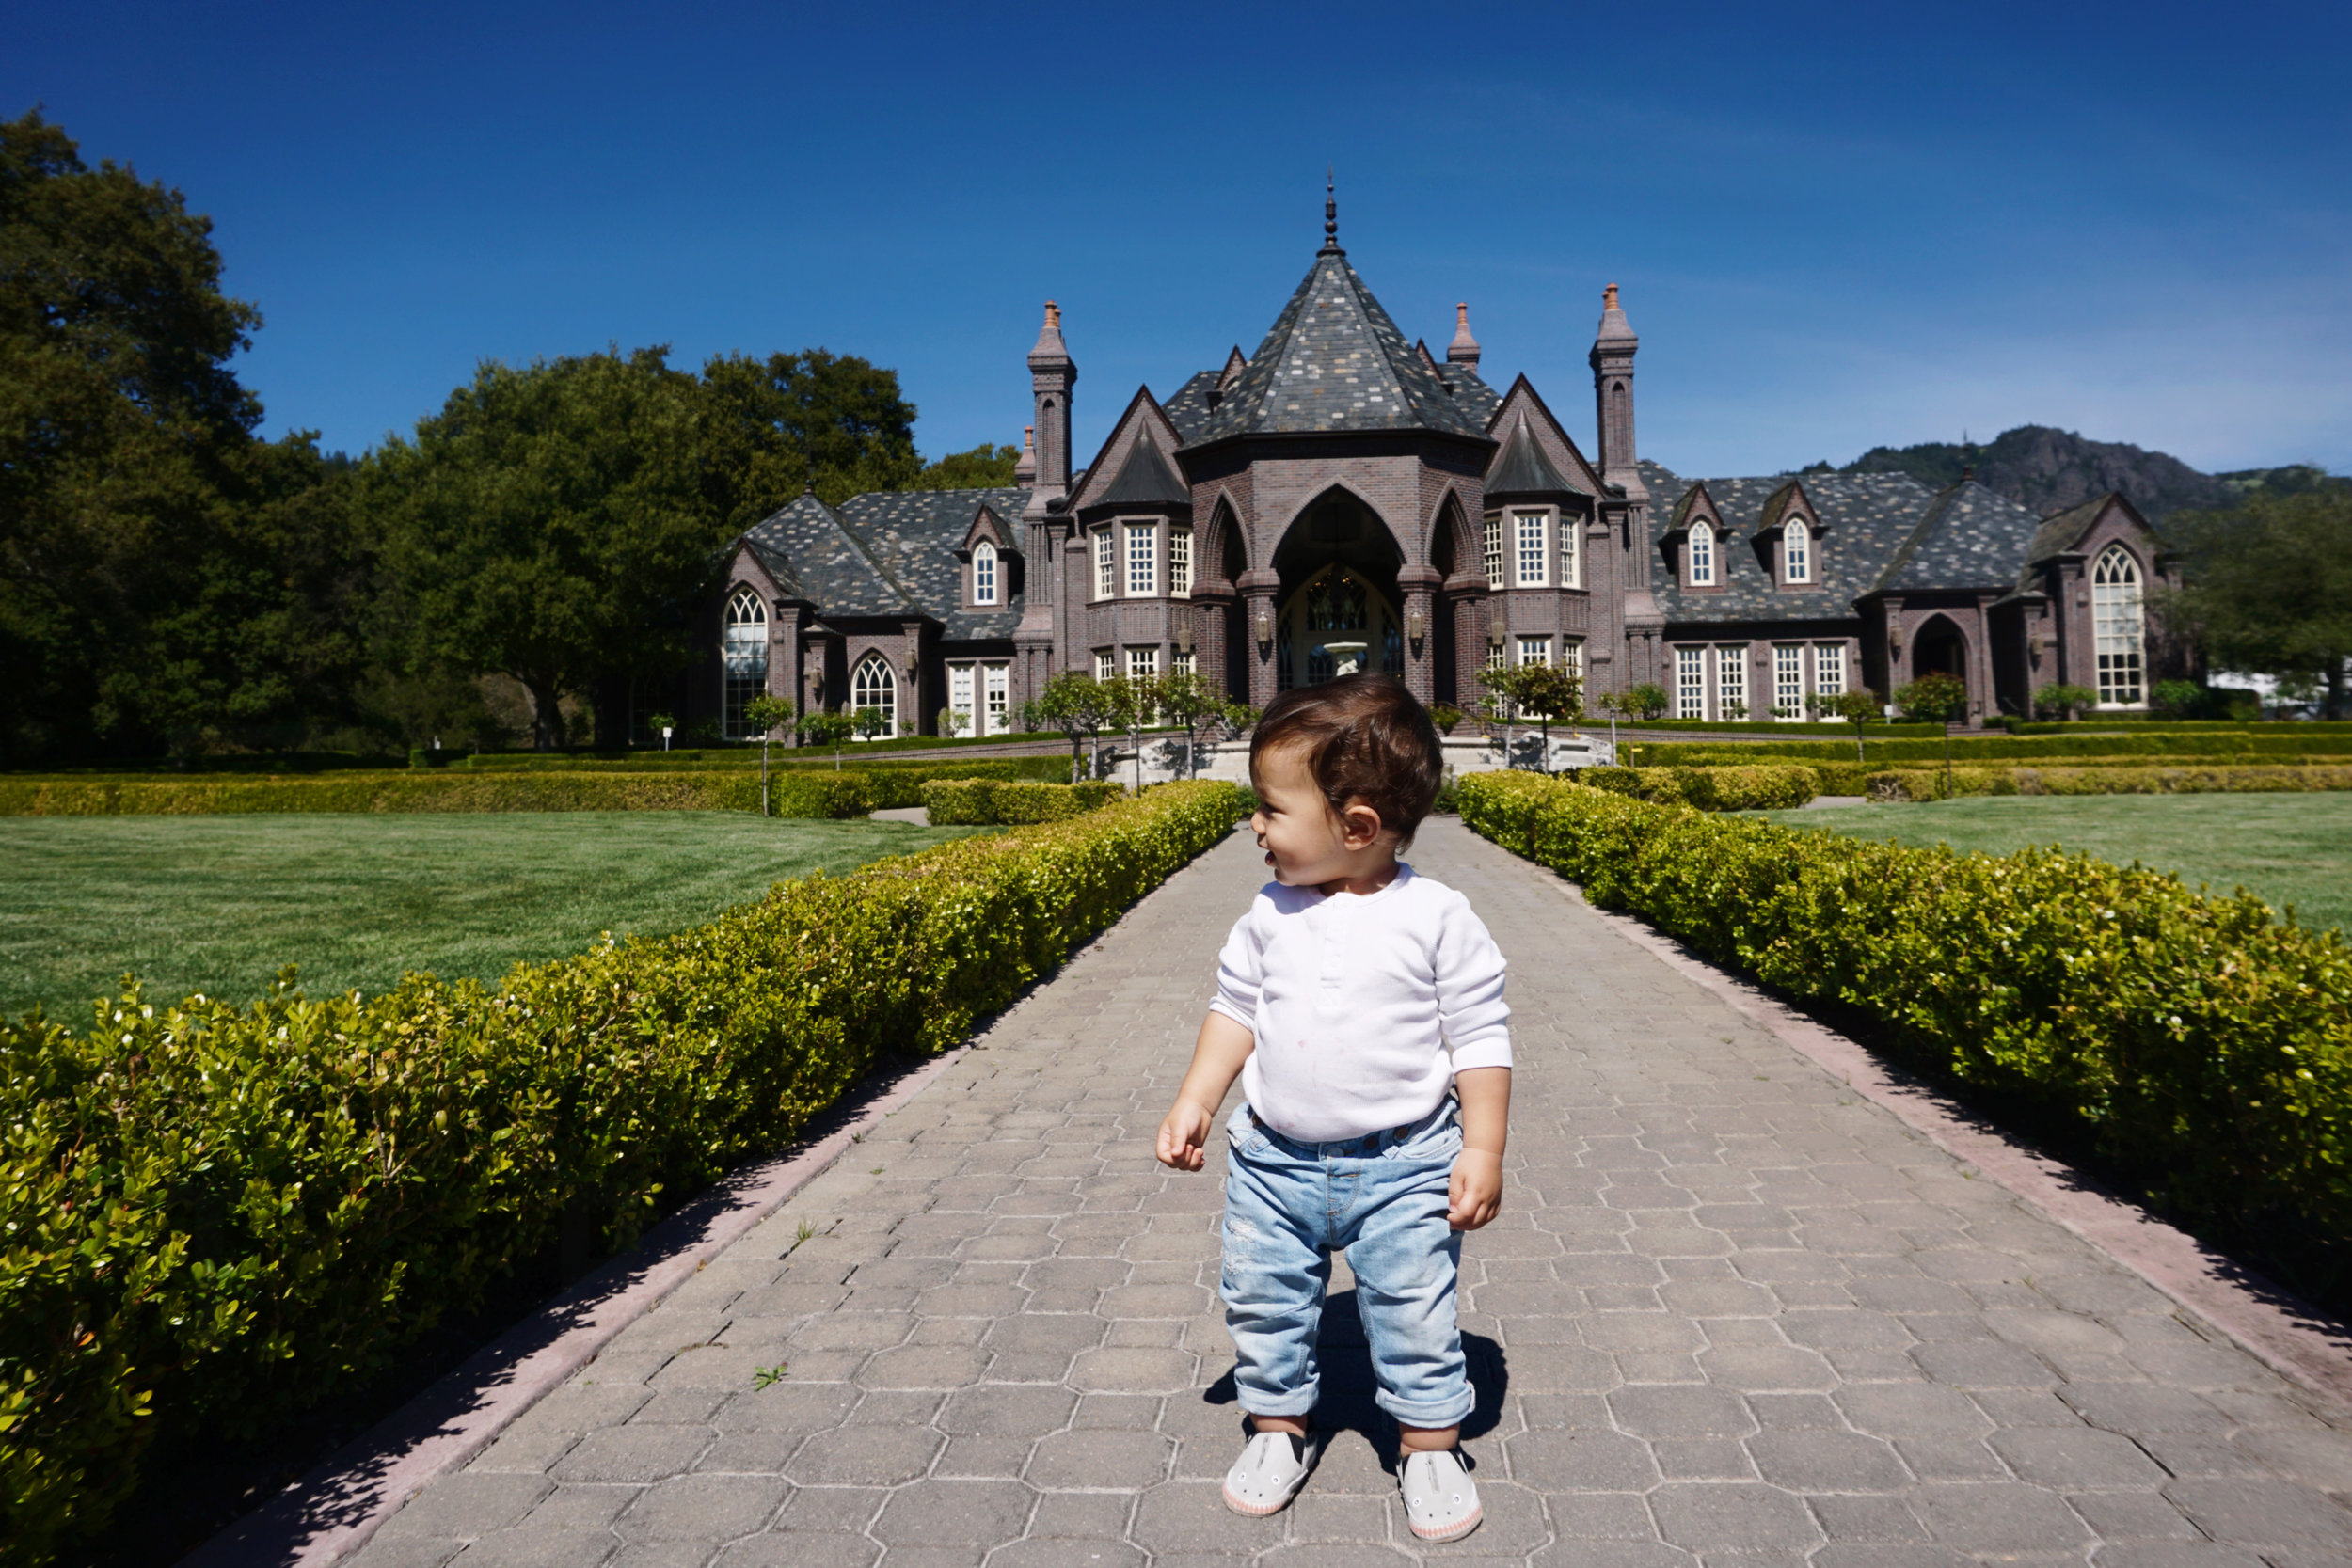 USA_California_Sonoma_Napa_Ledson Winery & Vineyards_baby toddler out front castle.jpg